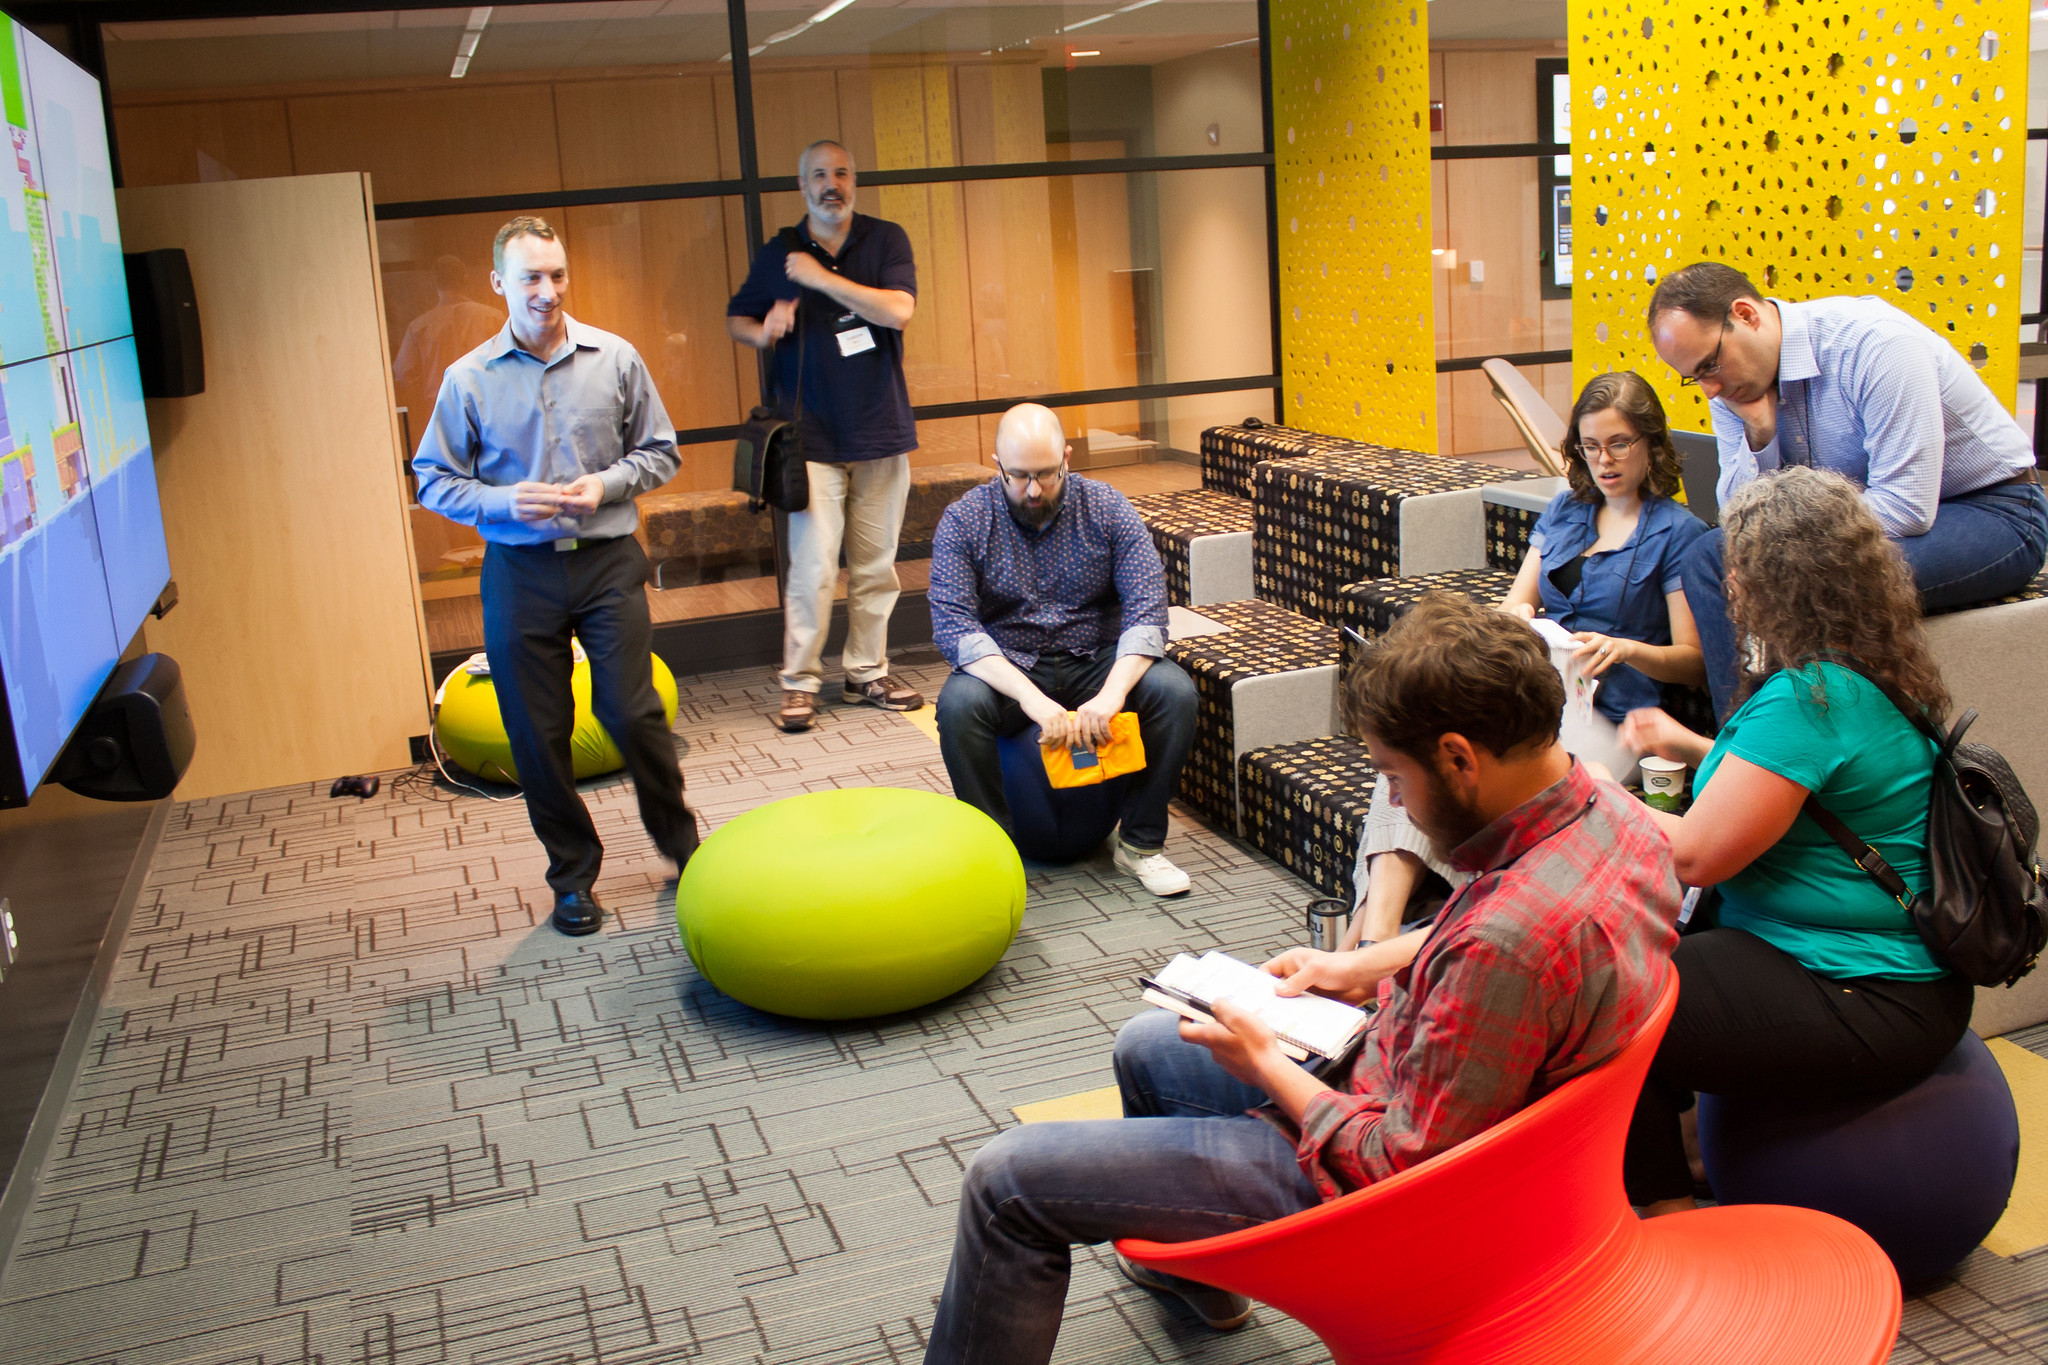 Several people try out a variety of seating options in a colorful workshop space